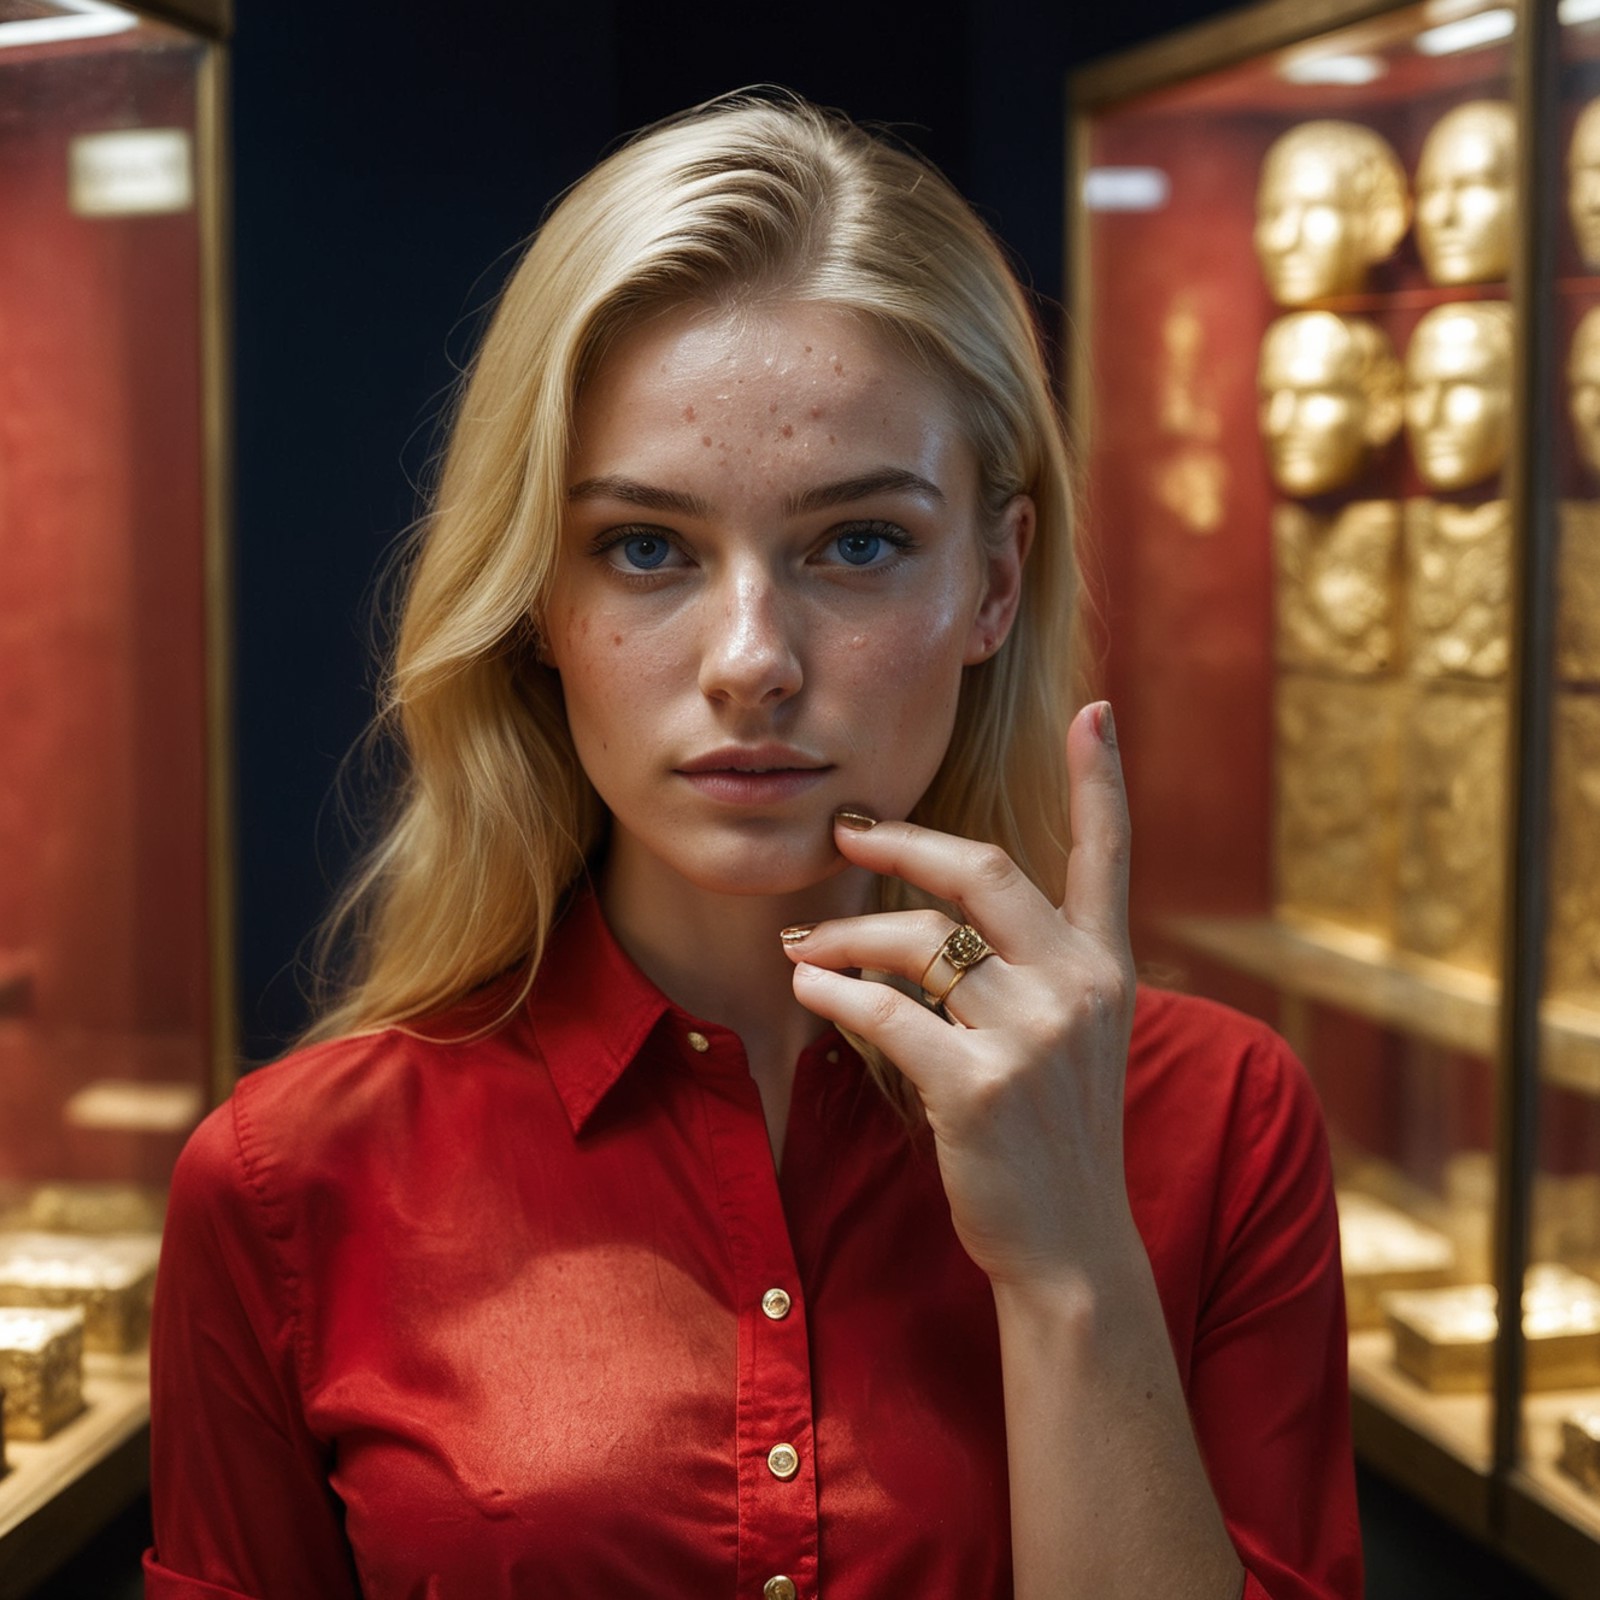 RAW photo, portrait of a beautiful blonde woman wearing a red shirt, she stands in a museum with artifacts made of old gol...